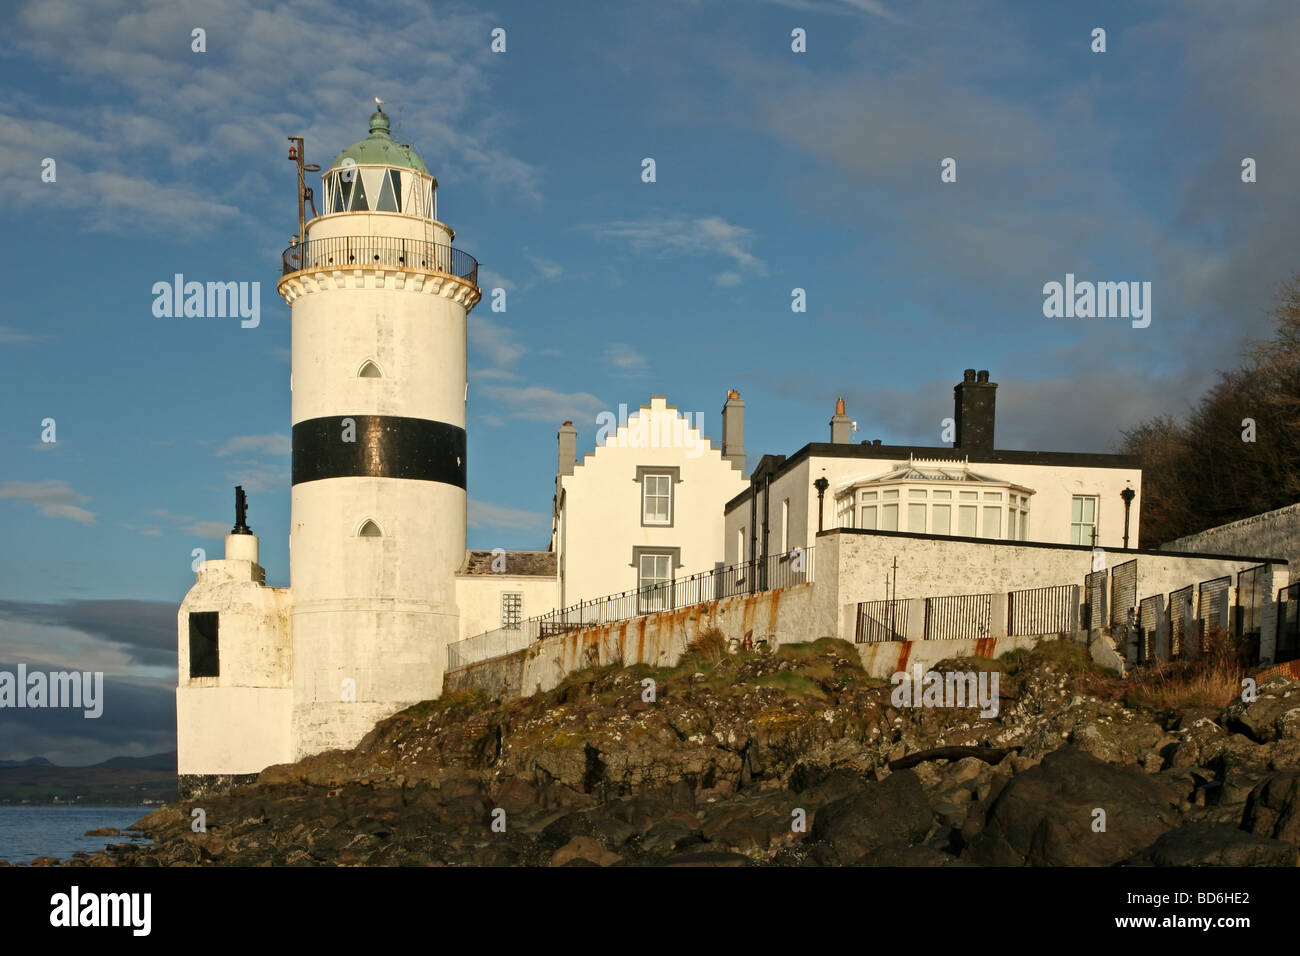 Cloch Lighthouse on the Firth of Clyde Stock Photo